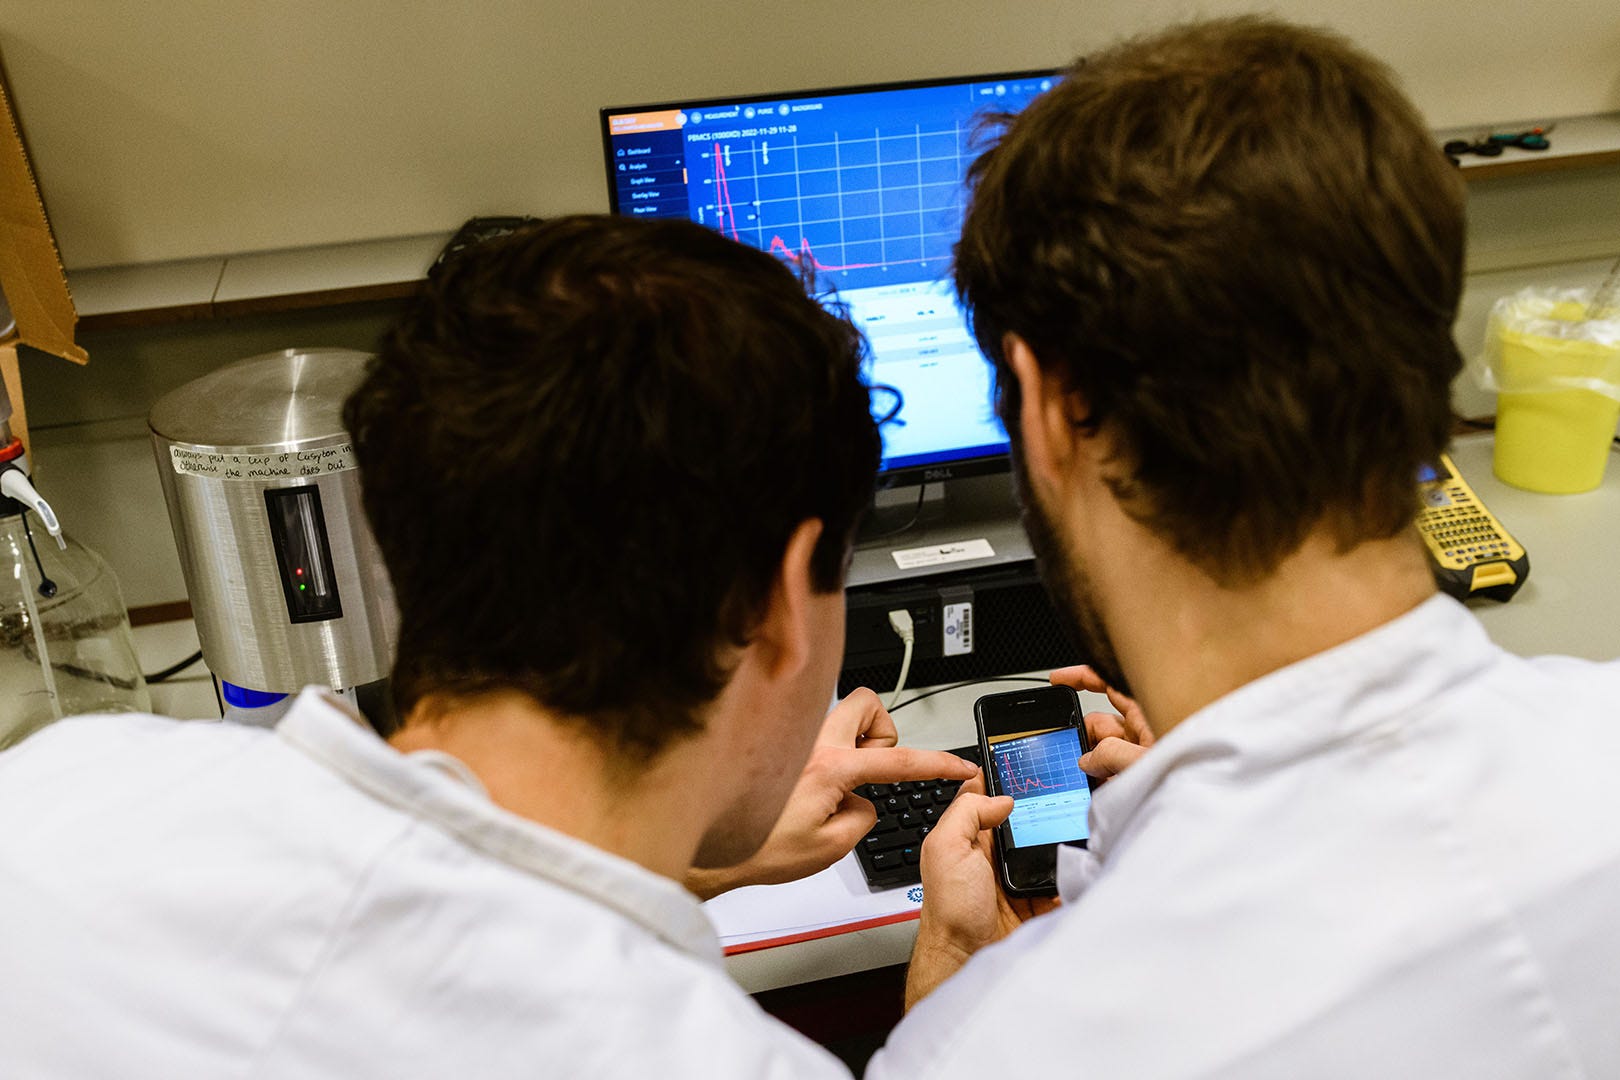 Two scientists in lab coats analyzing data on a smartphone and a computer screen displaying a graph in a laboratory setting